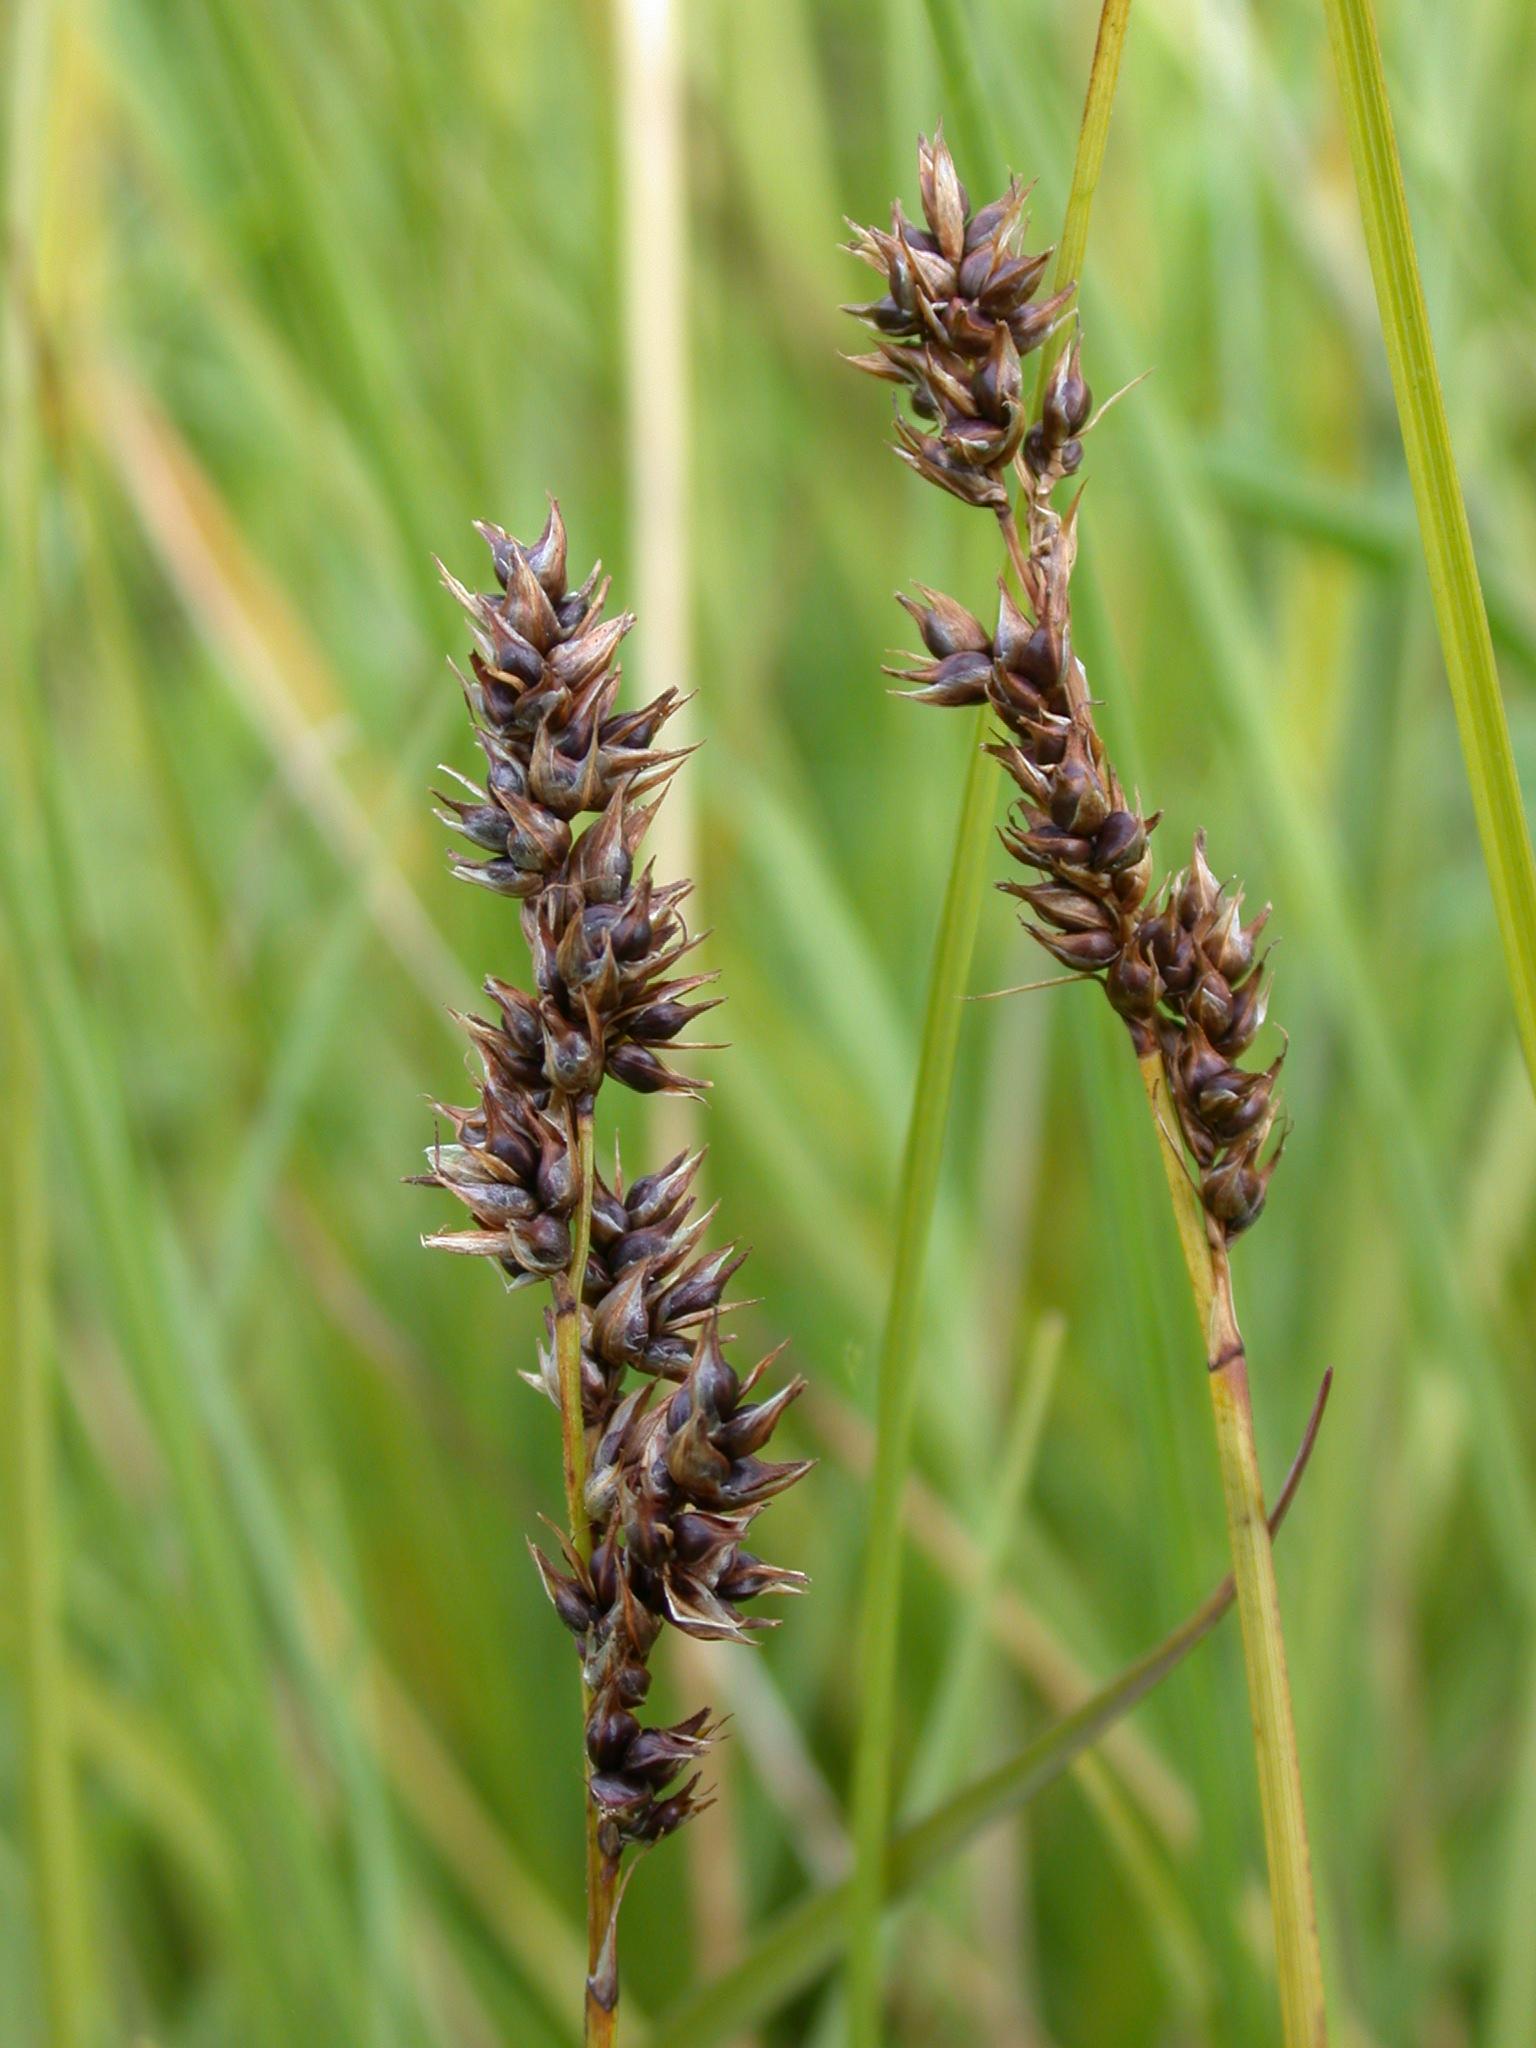 burgundy-purple spikelets with lime-yellow foliage and stems